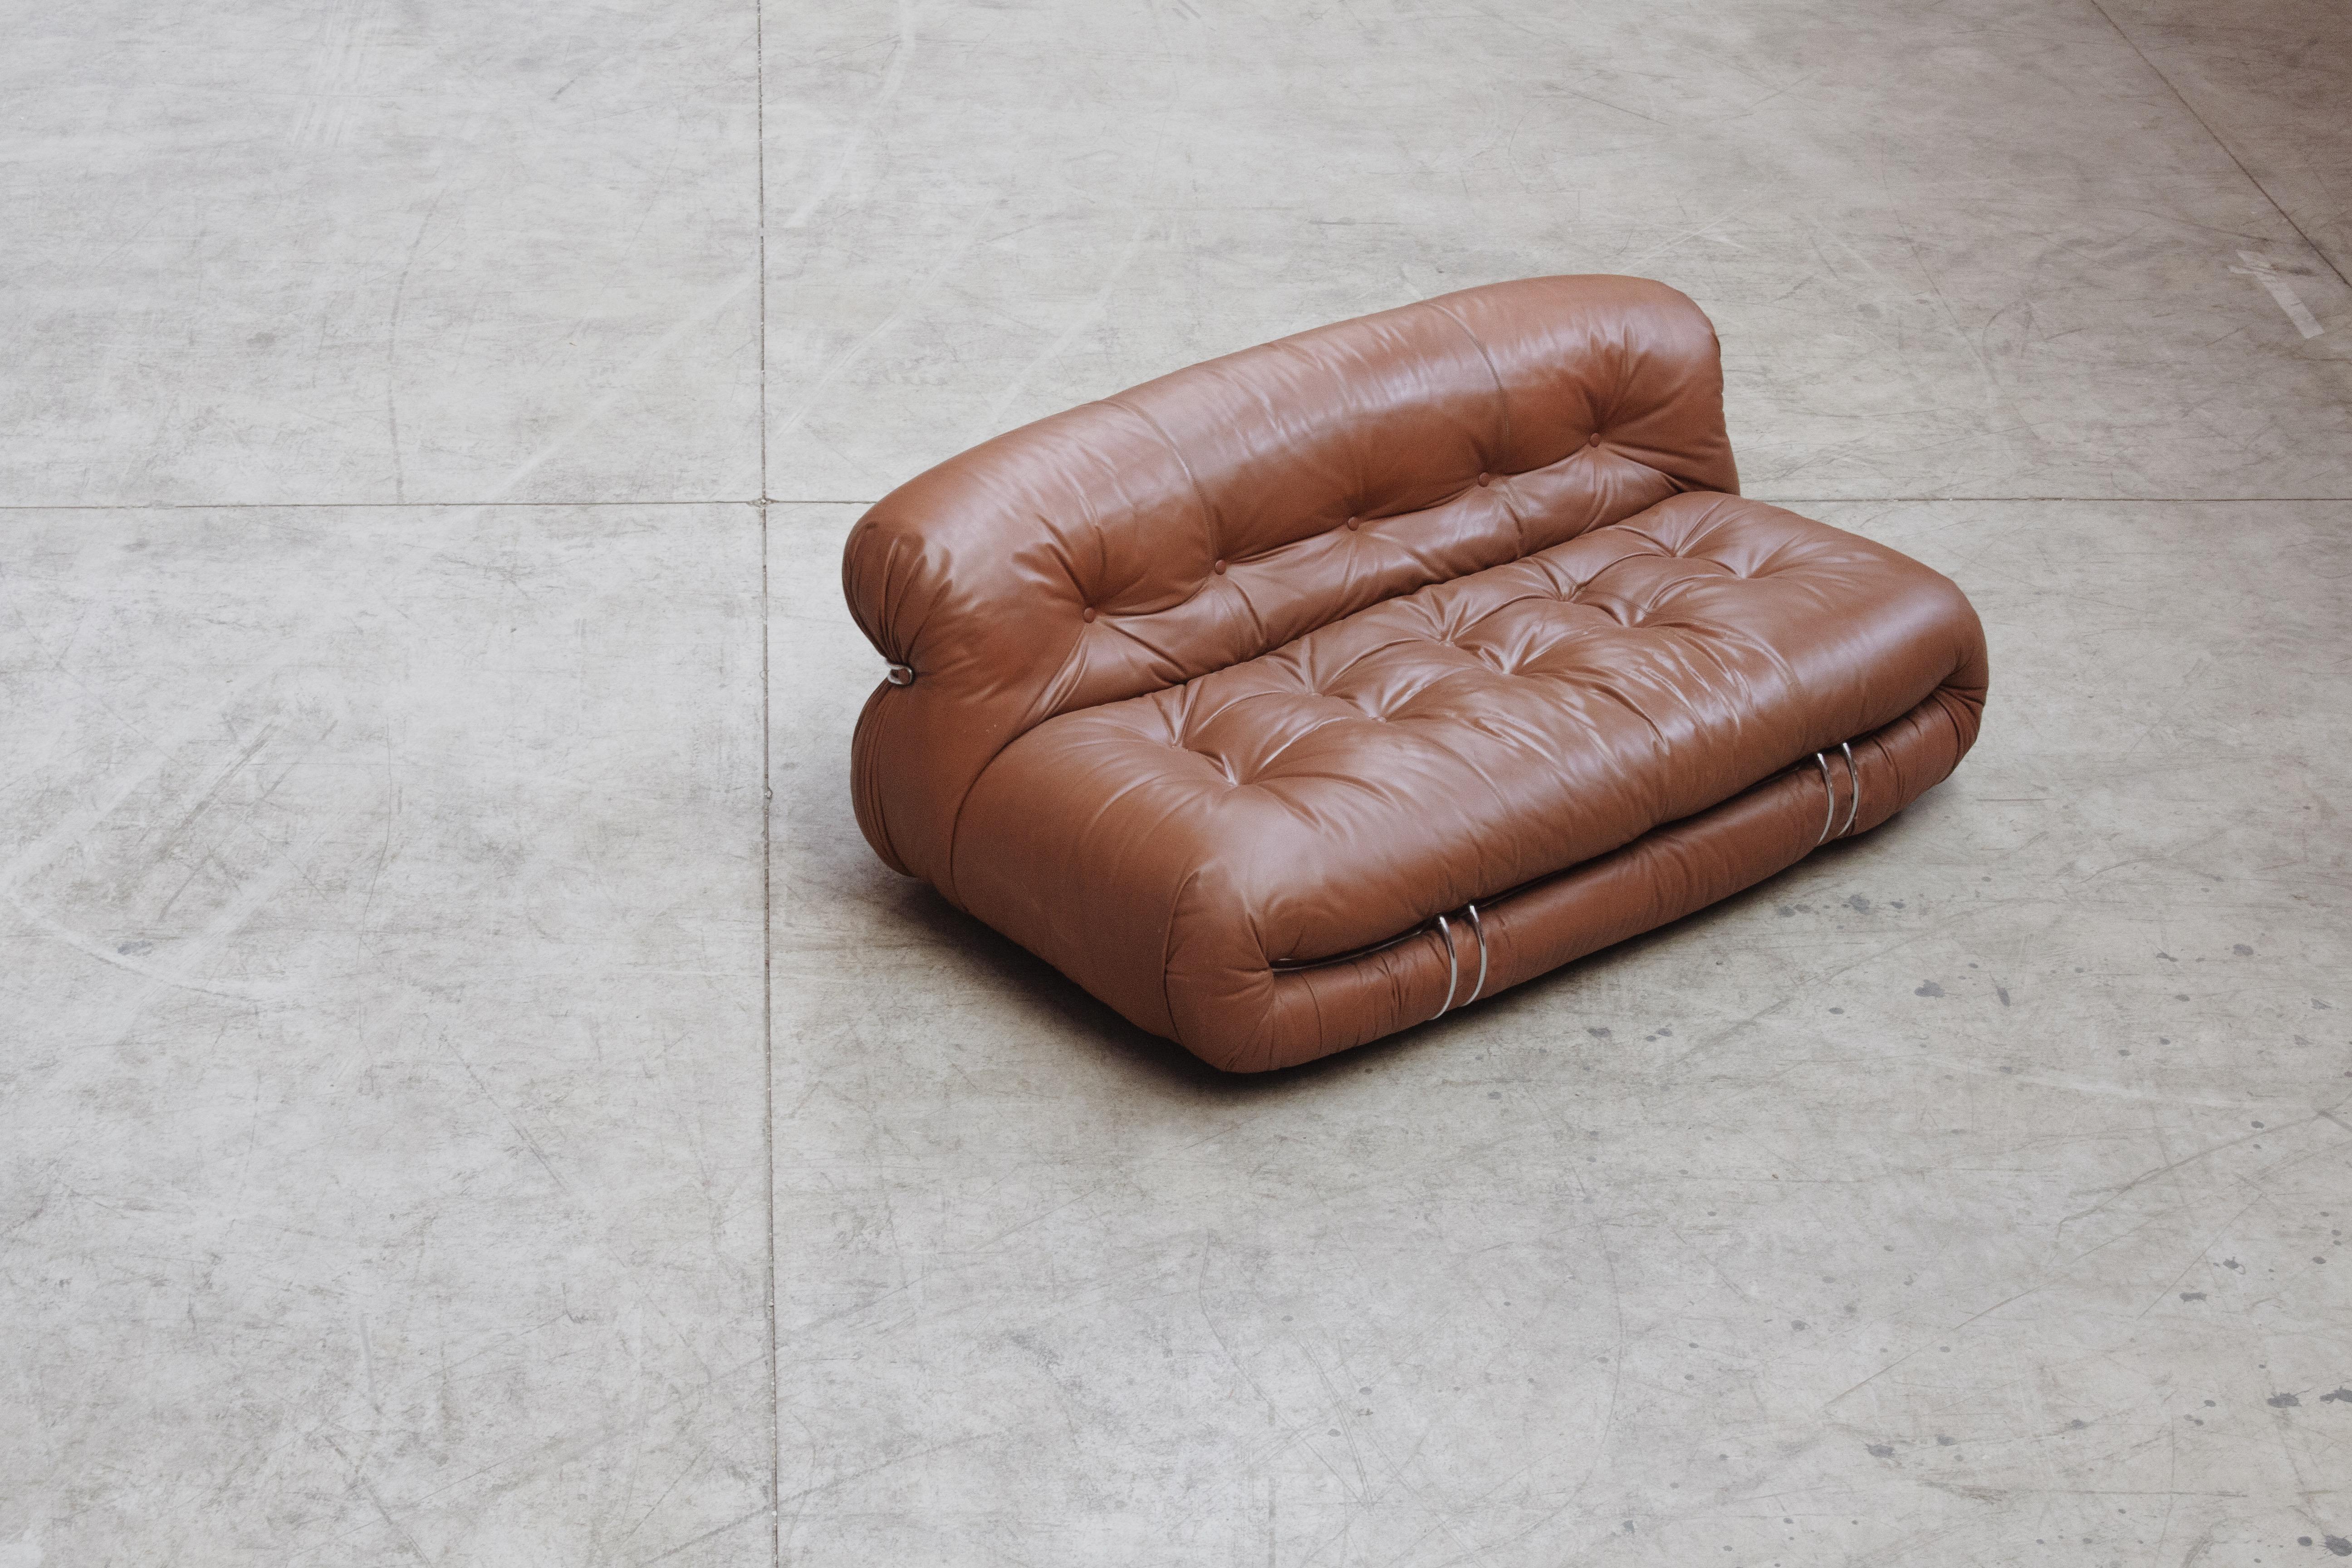 Afra & Tobia Scarpa “Soriana” Sofa for Cassina, original cognac leather, 1969

Although technically designed in the 1960s, the 